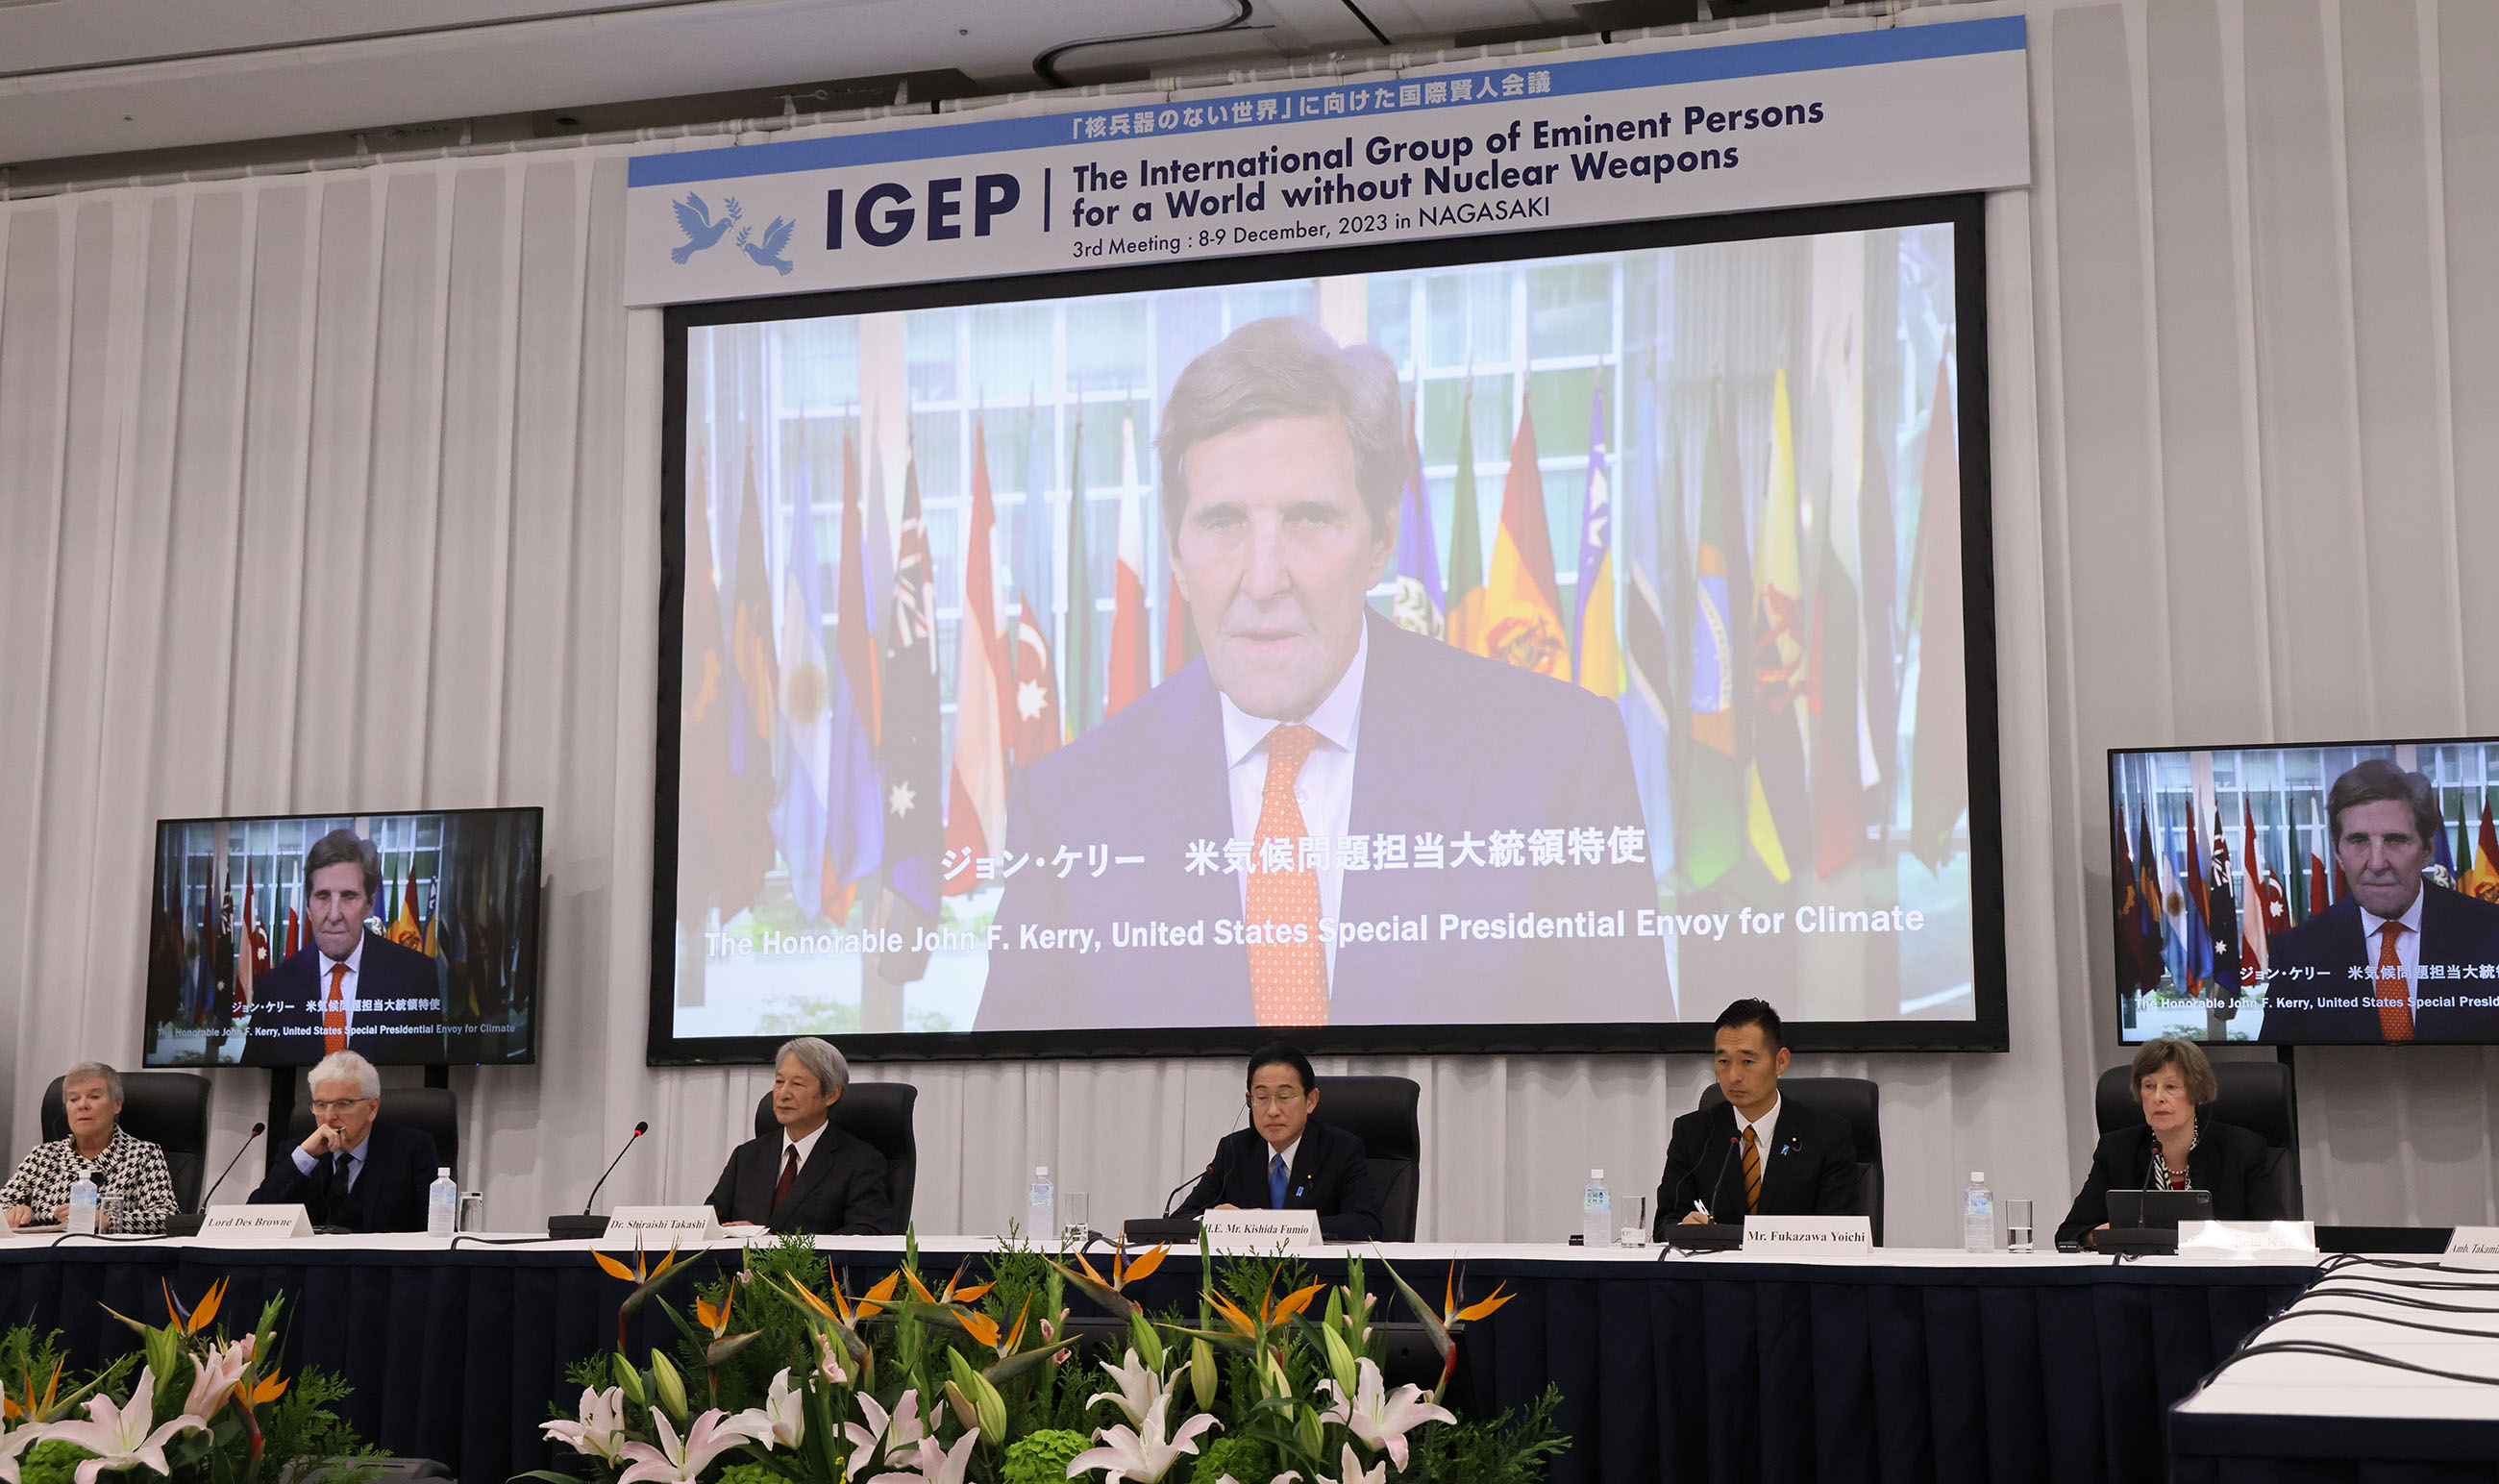 Meeting of the International Group of Eminent Persons for a World without Nuclear Weapons (IGEP) (4)